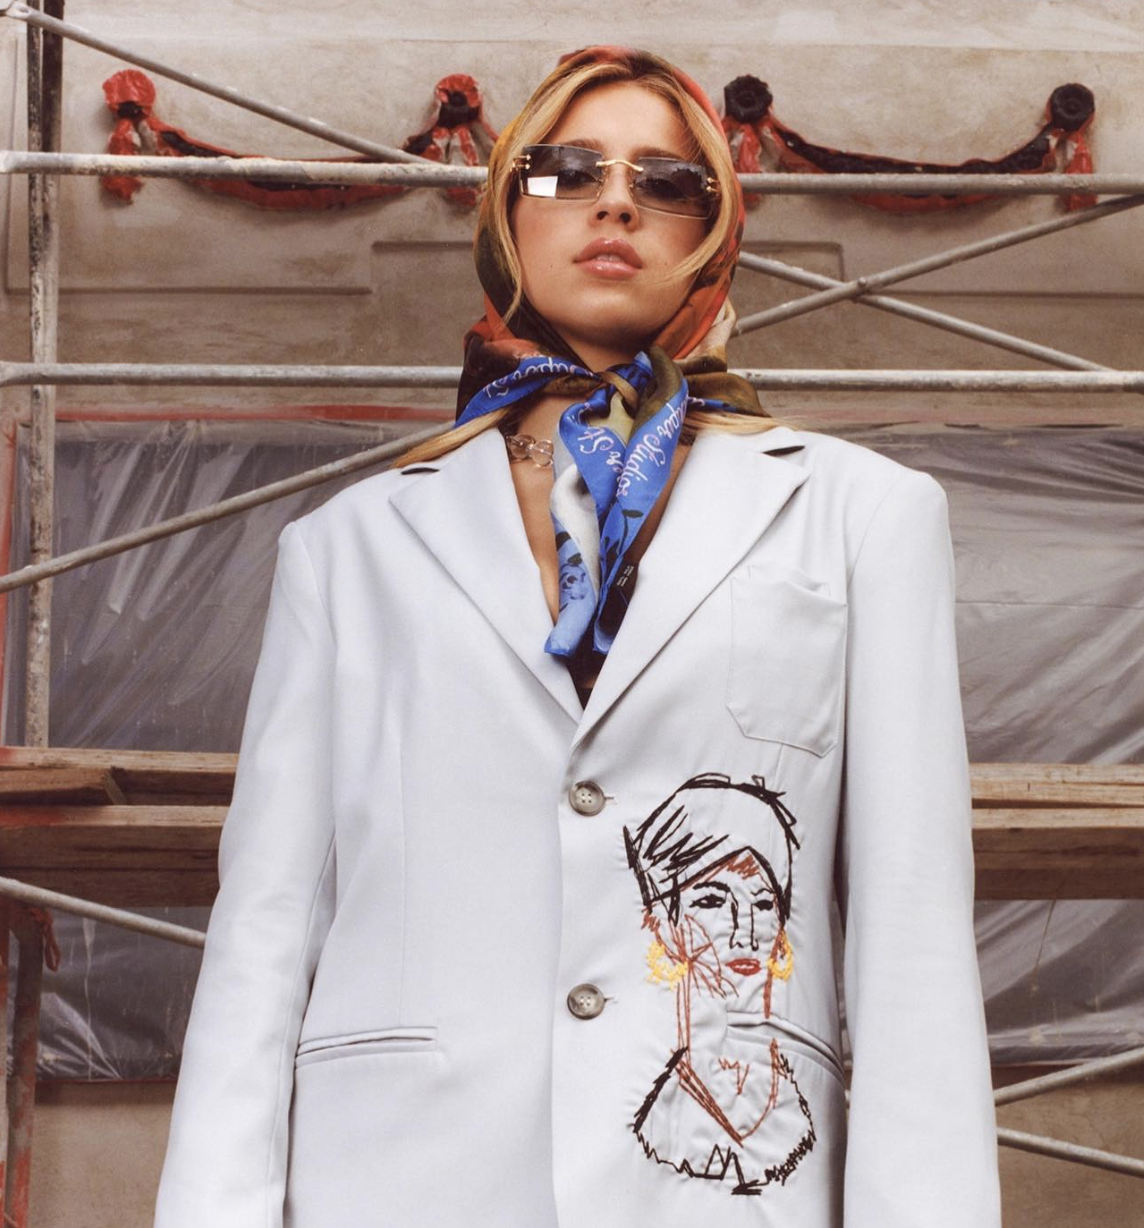 Tate McRae poses in an oversized white jacket, a silk head scarf and sunglasses.